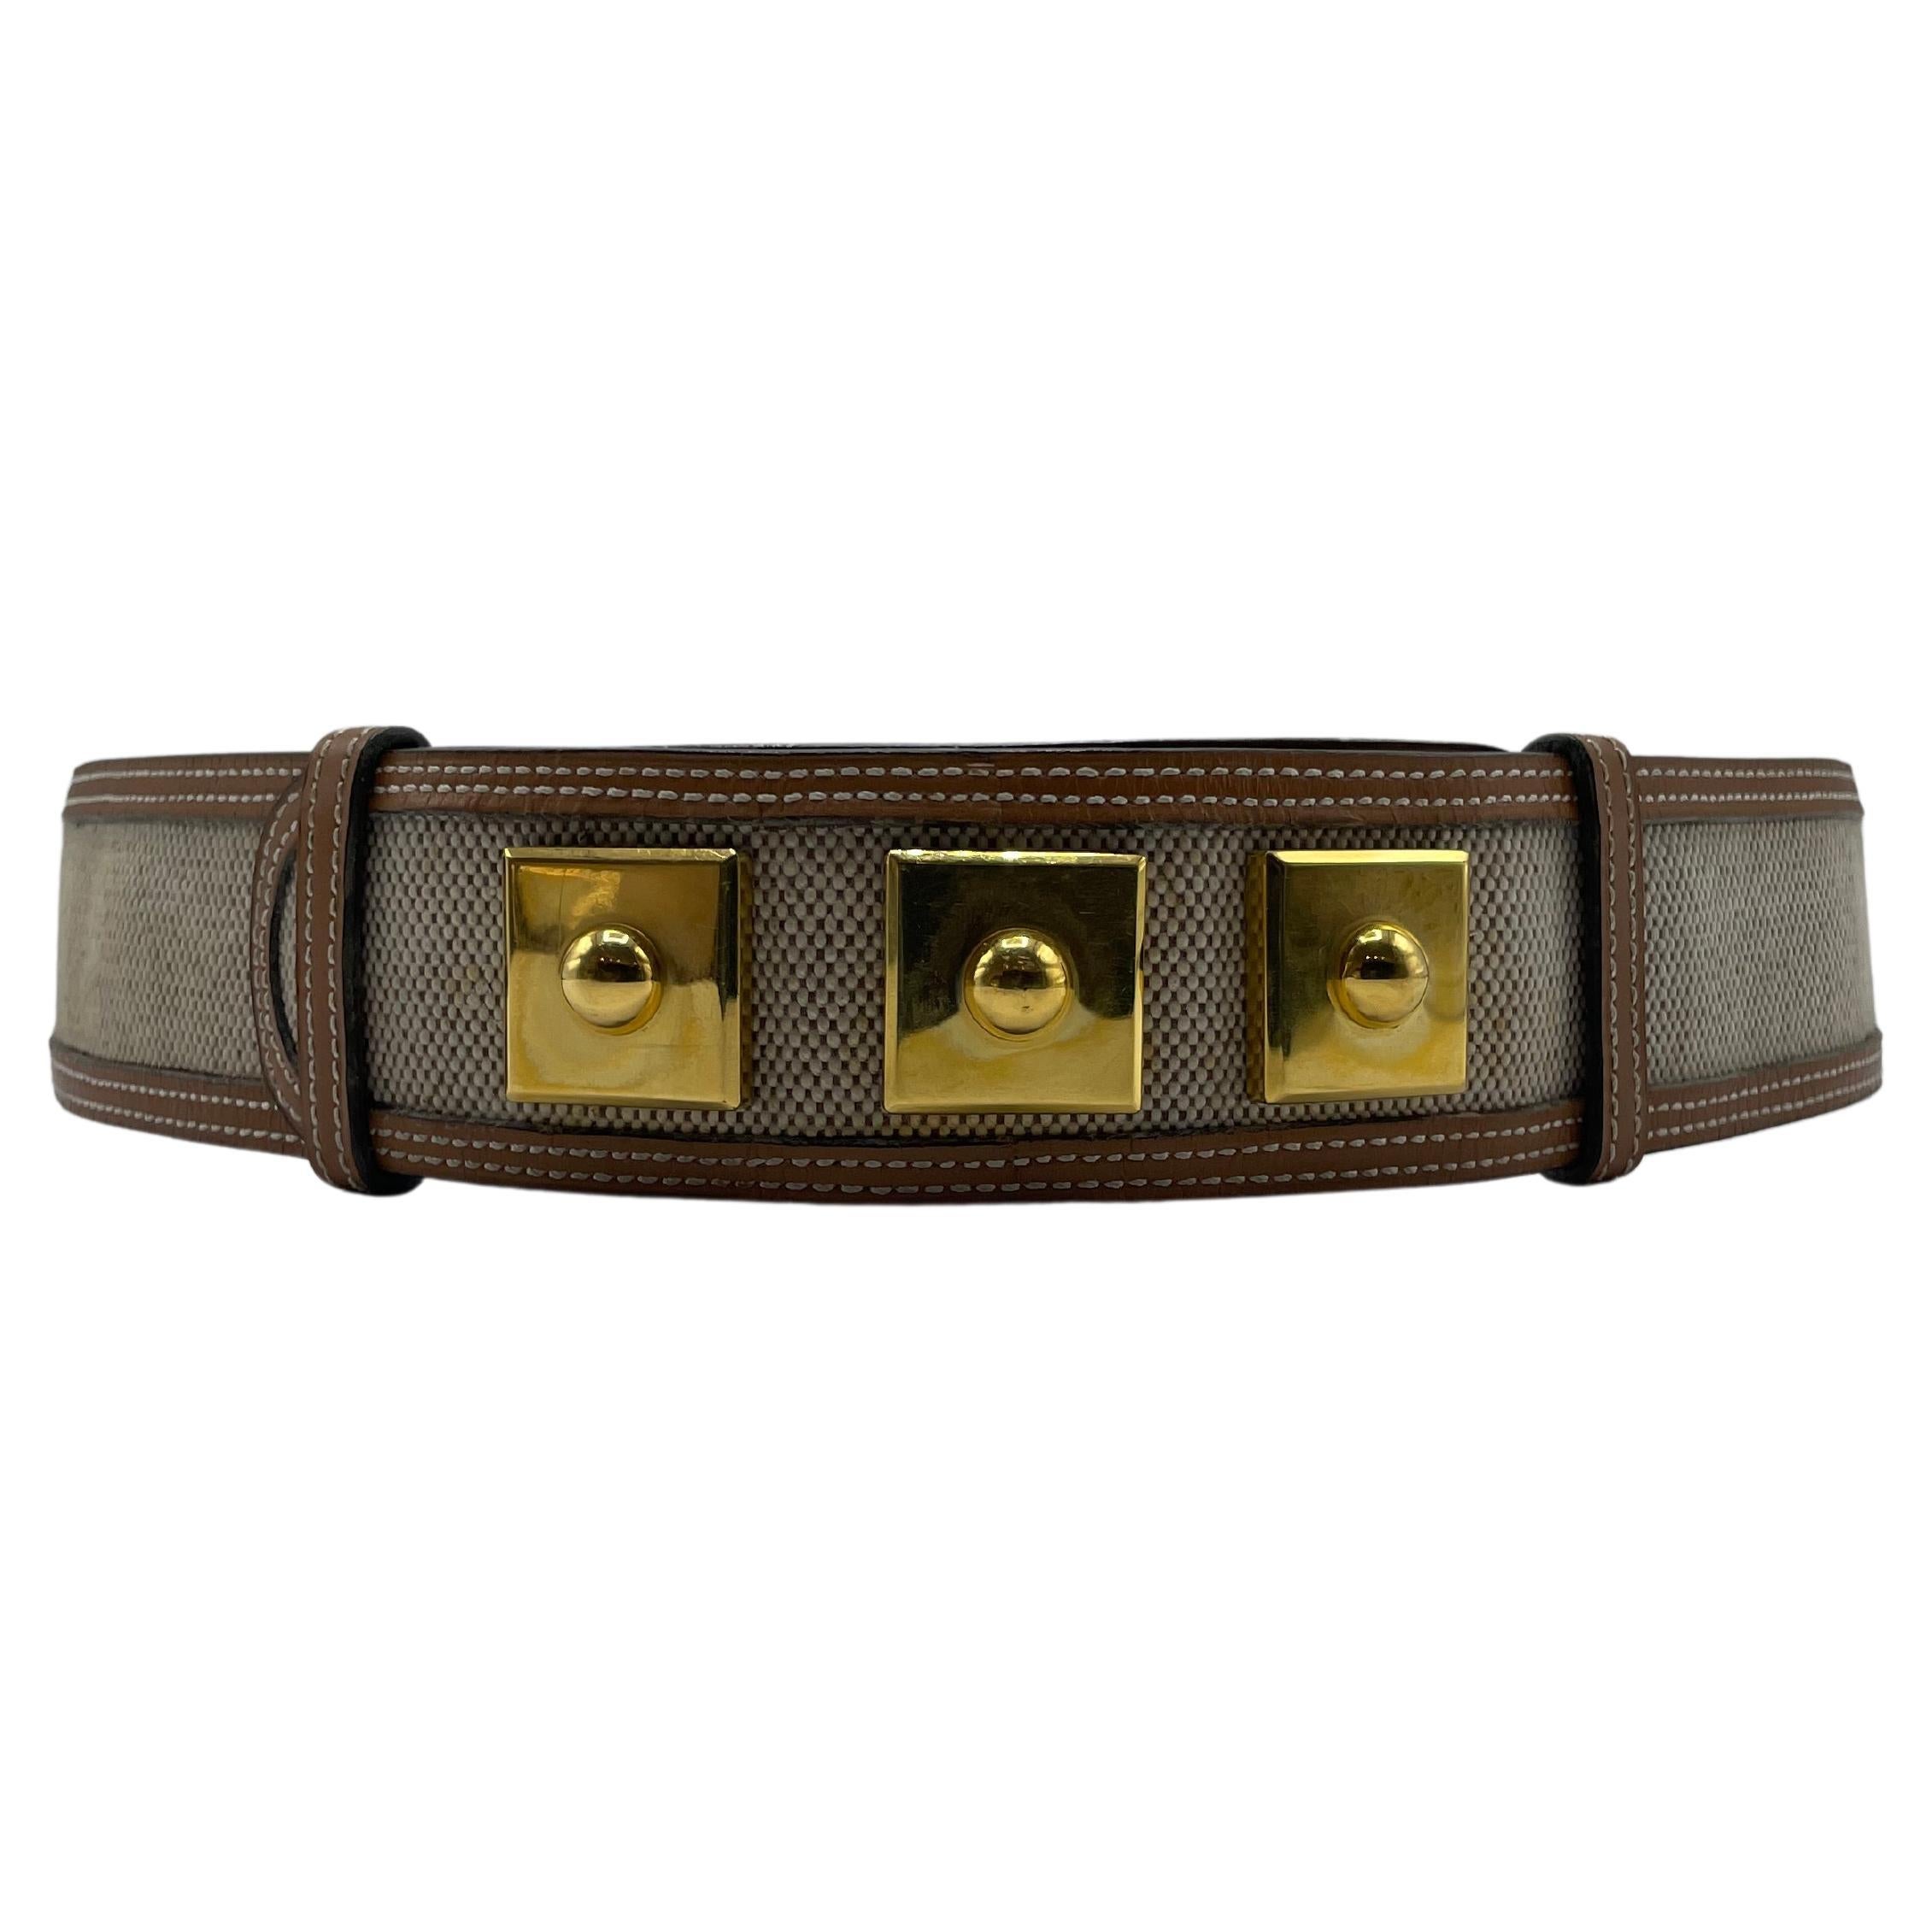 Hermès Piano Belt in Leather and Canvas. The canvas is in great shape and does not have any stains or odors. This stunning Piano belt has three gold buckles that allow for customizable sizing, and the inner is camel leather.  Made in 1946.